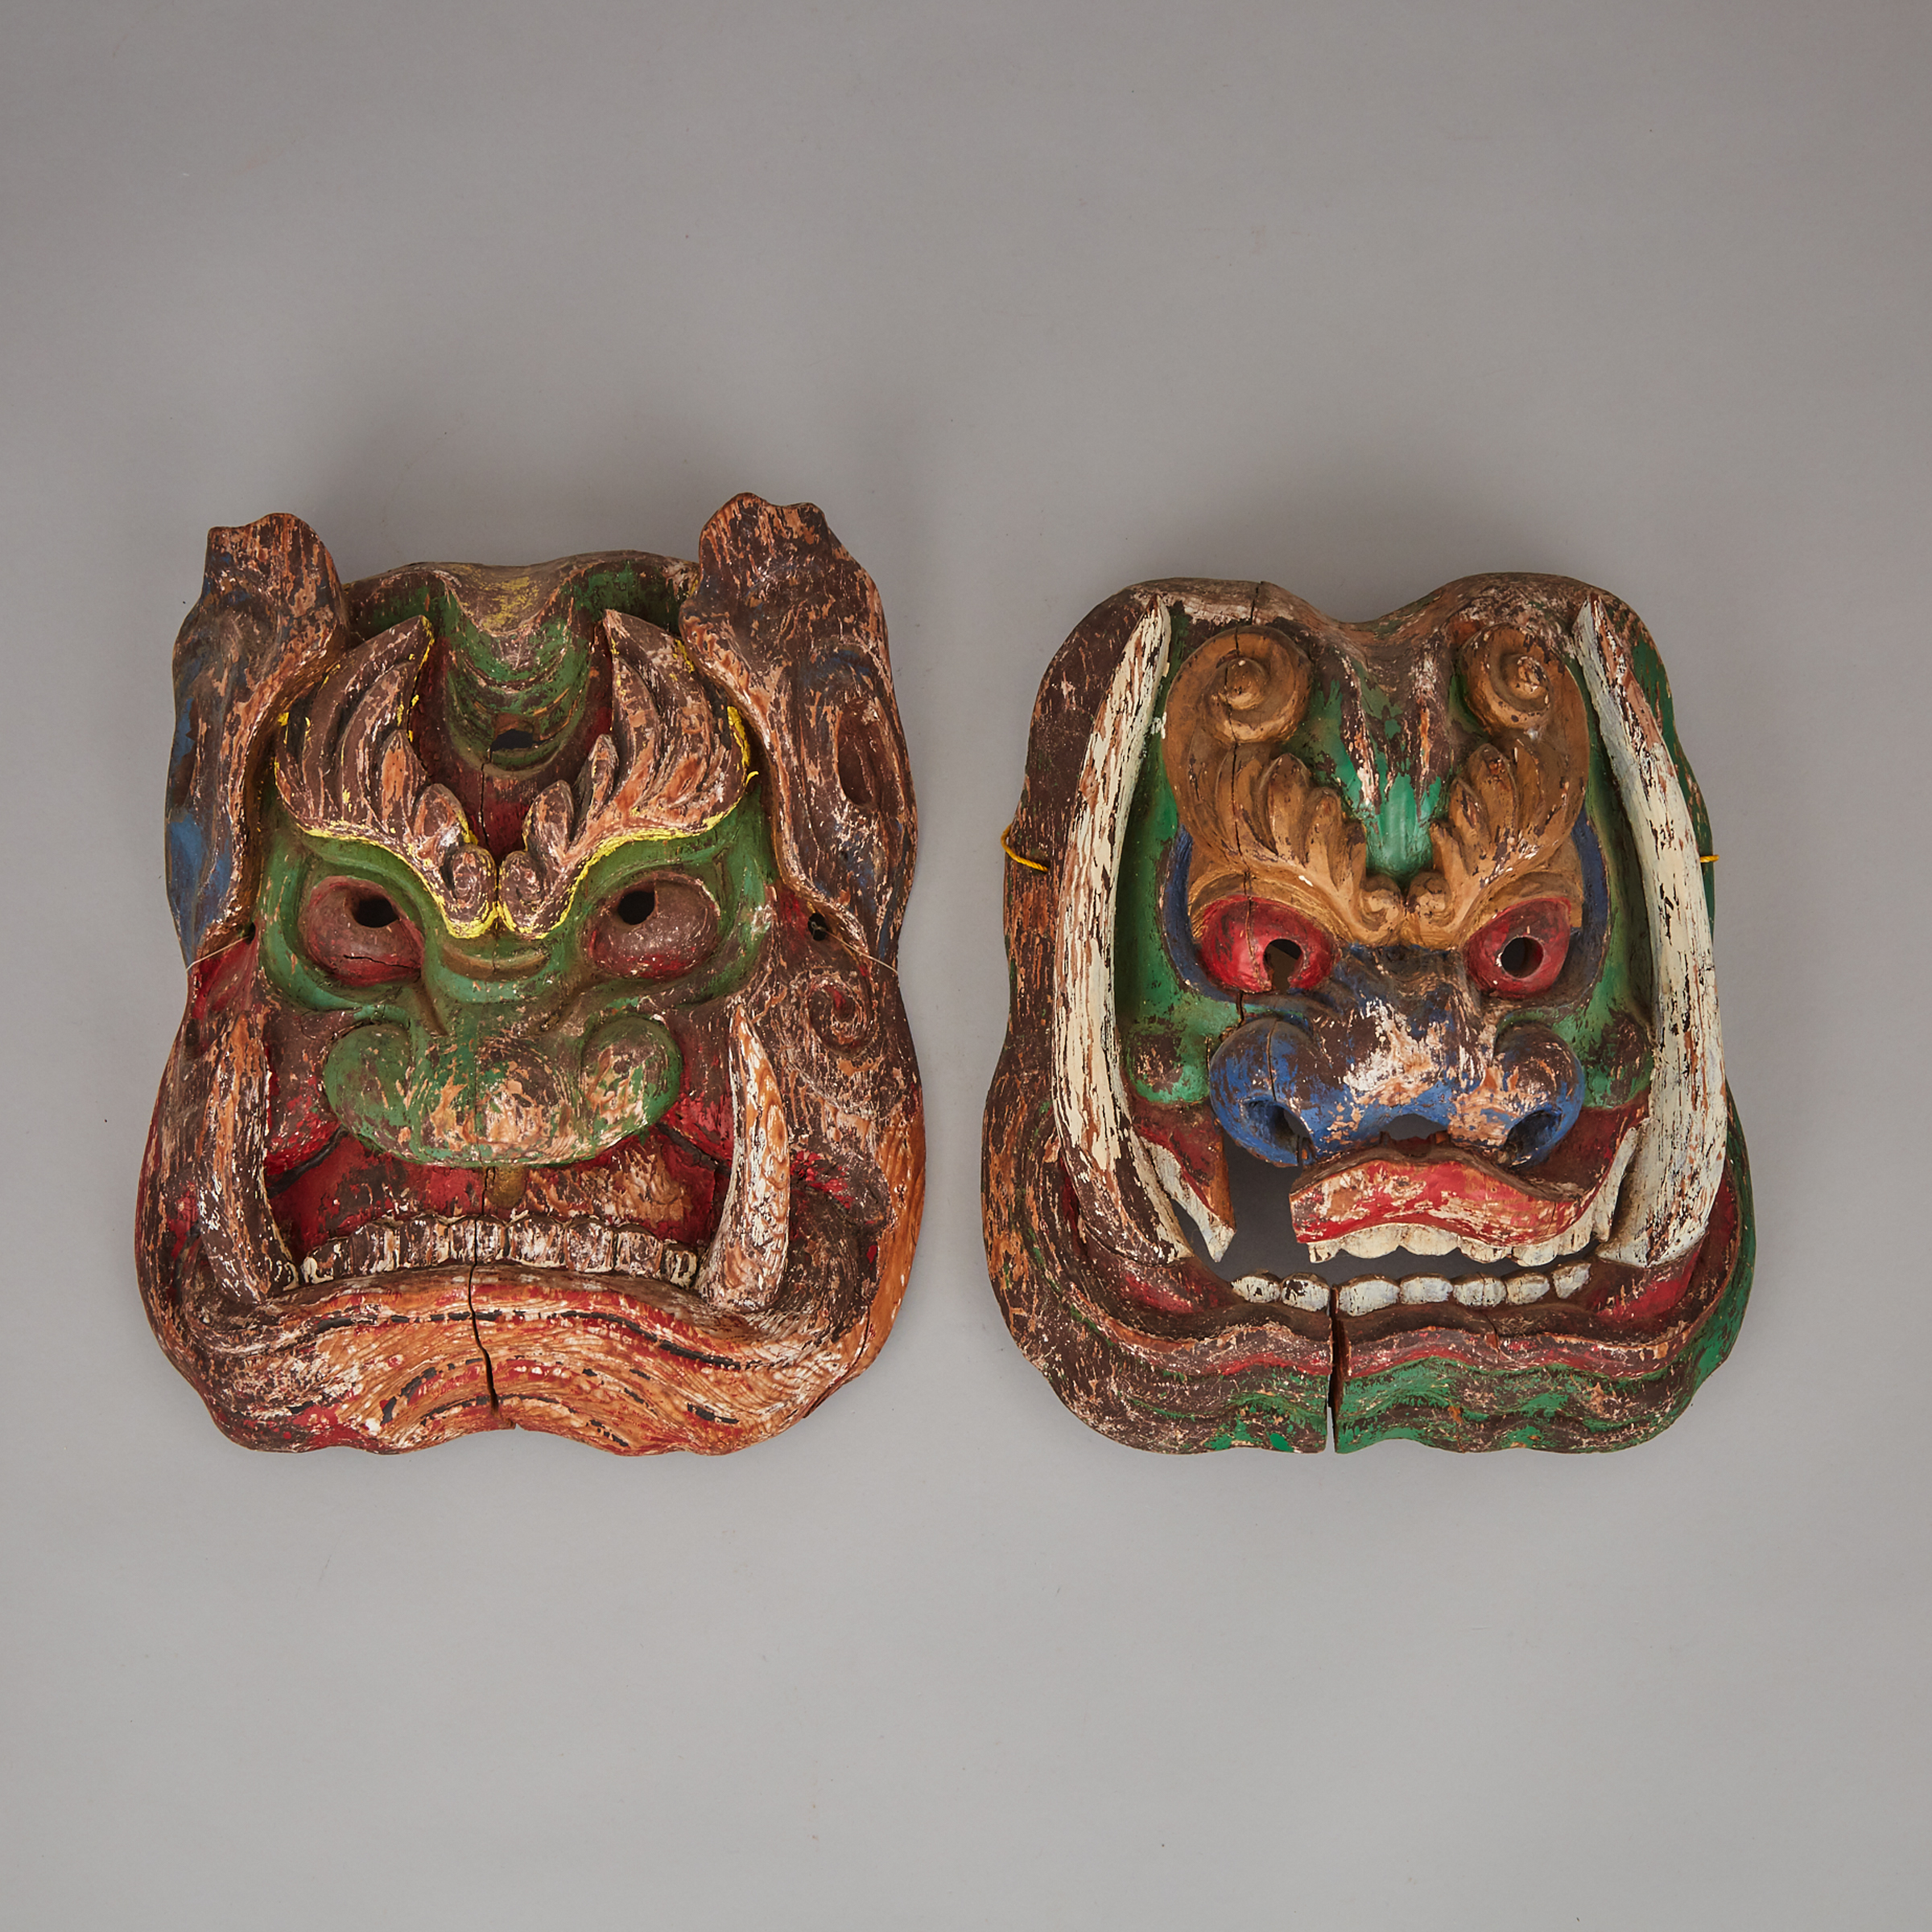 A Pair of Wood-Carved Masks of Wrathful Deities, Northern China